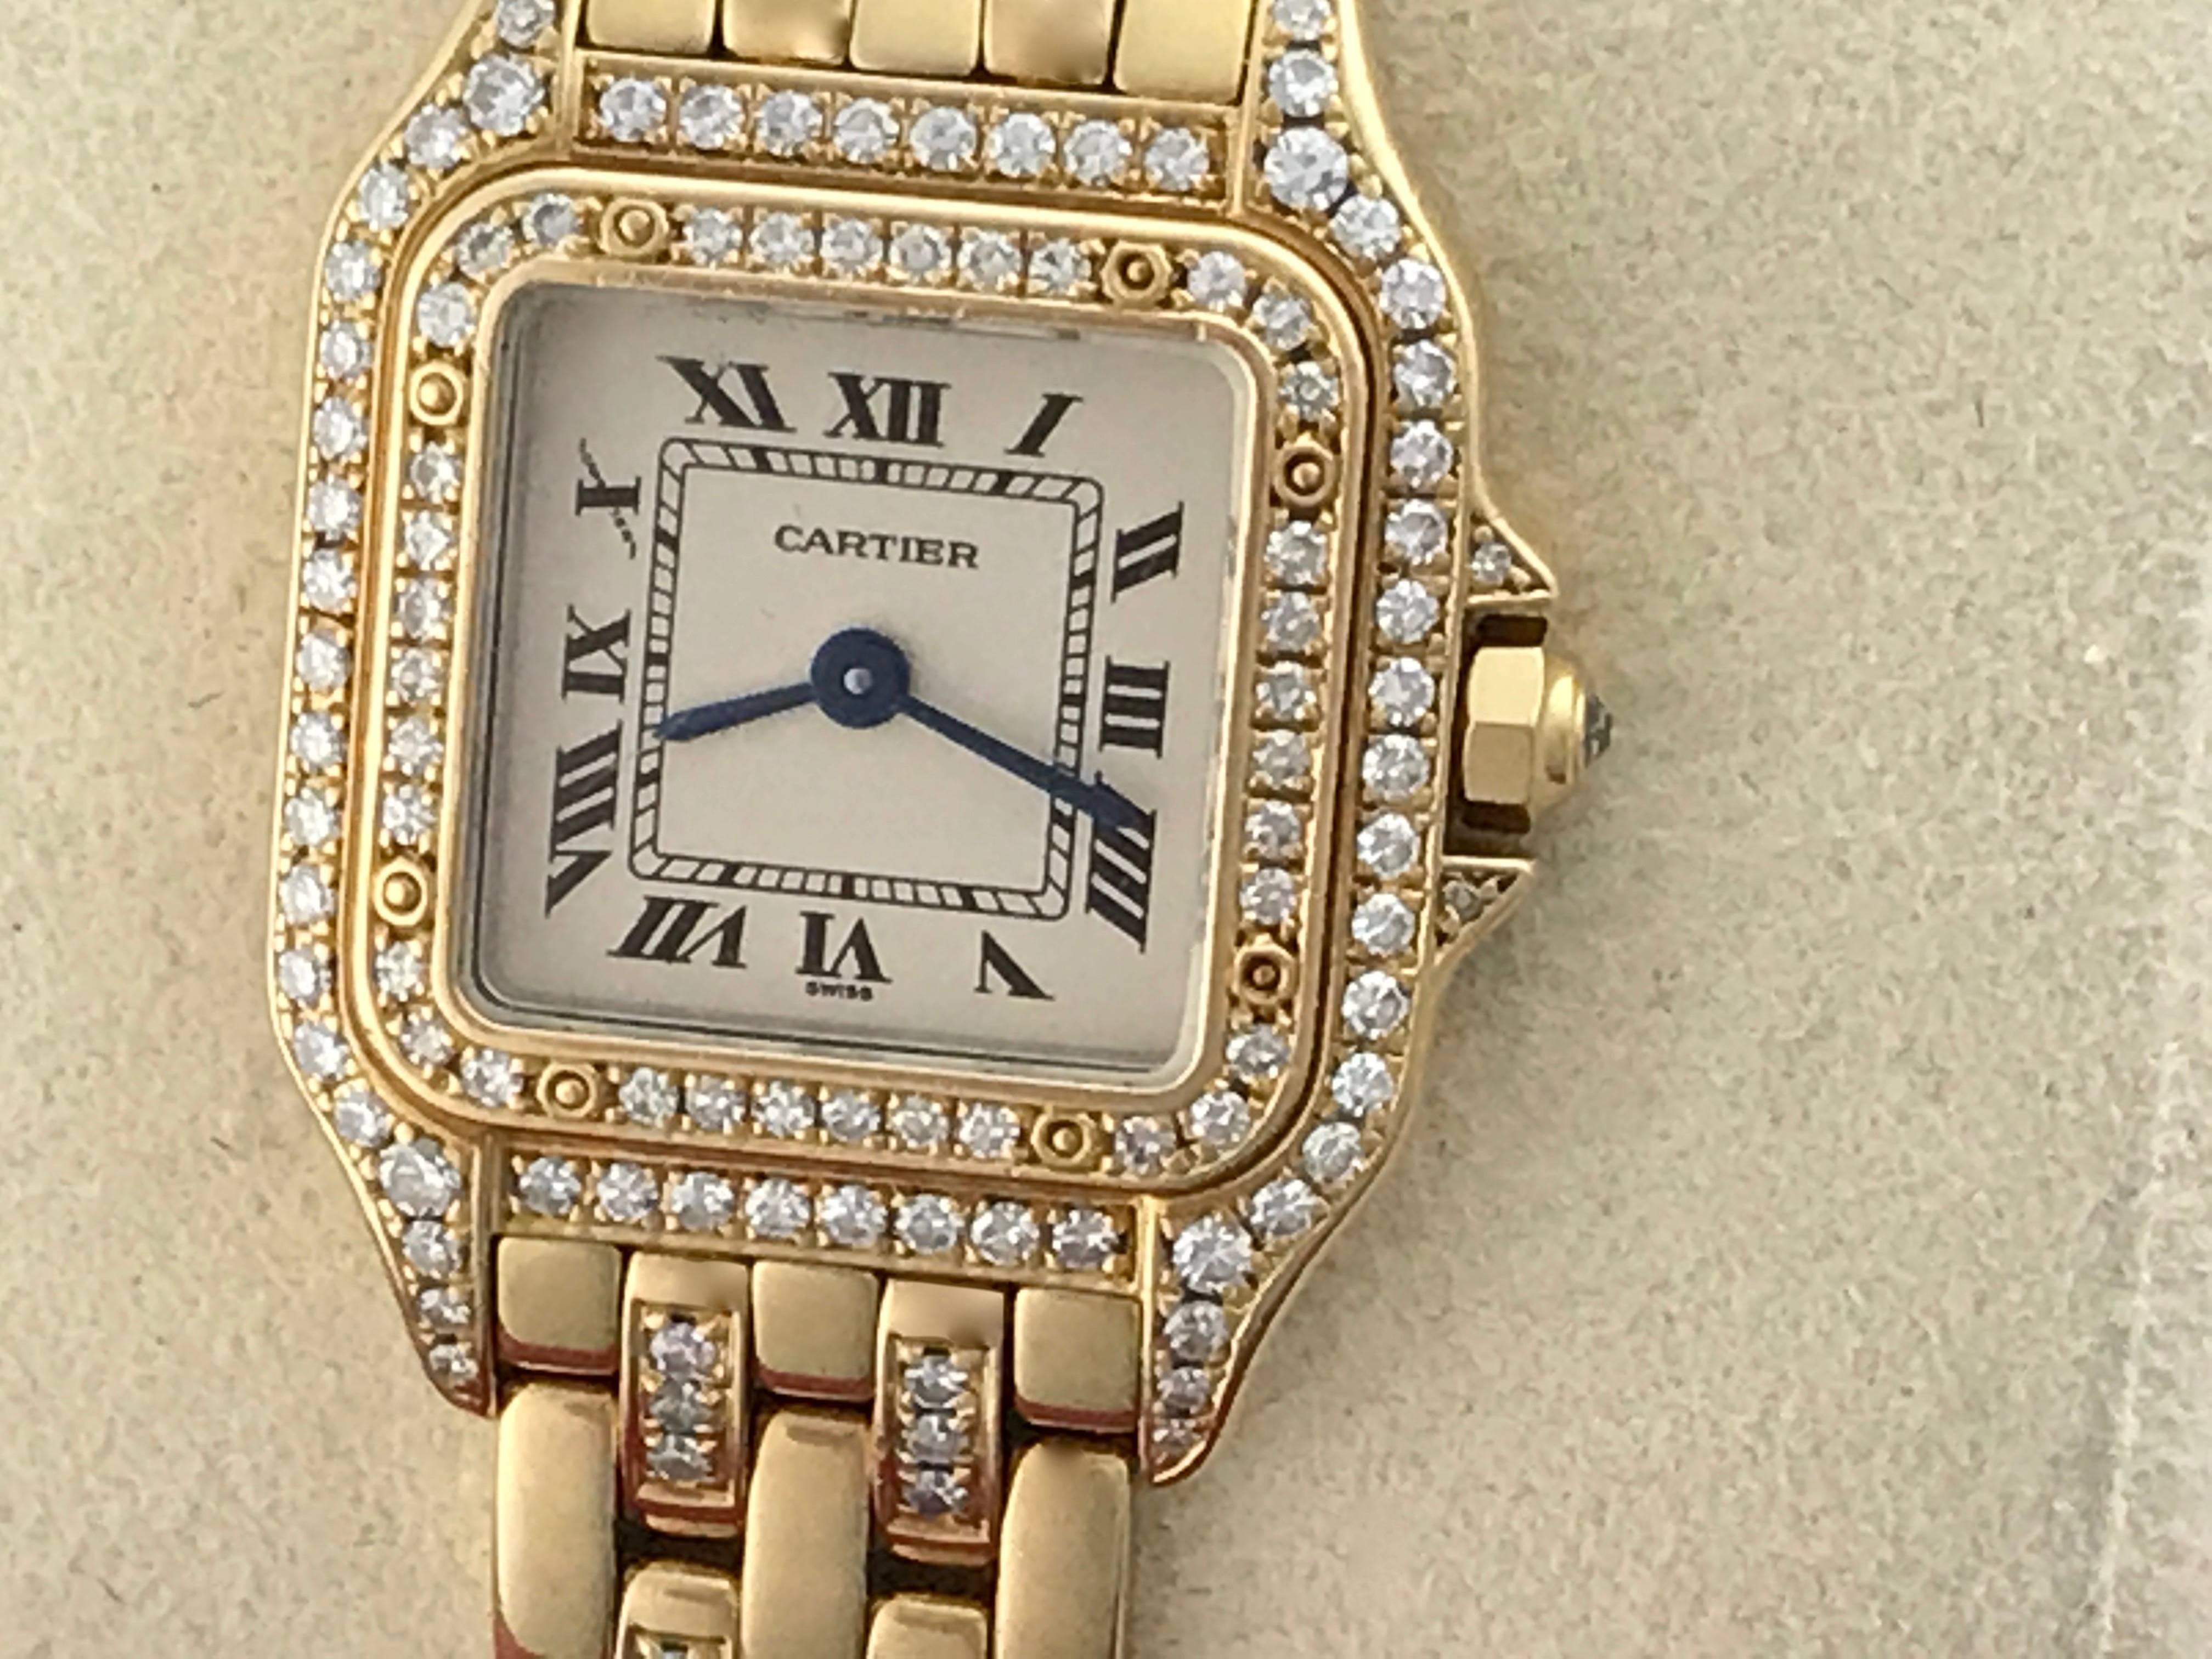 Cartier Ladies Panther 18K Yellow Gold ladies diamond wrist watch. As new, Certified pre-owned and ready to ship.  Quartz movement, 18K Yellow Gold square case with diamonds.  18K Yellow Gold Cartier bracelet with diamonds. White dial with black